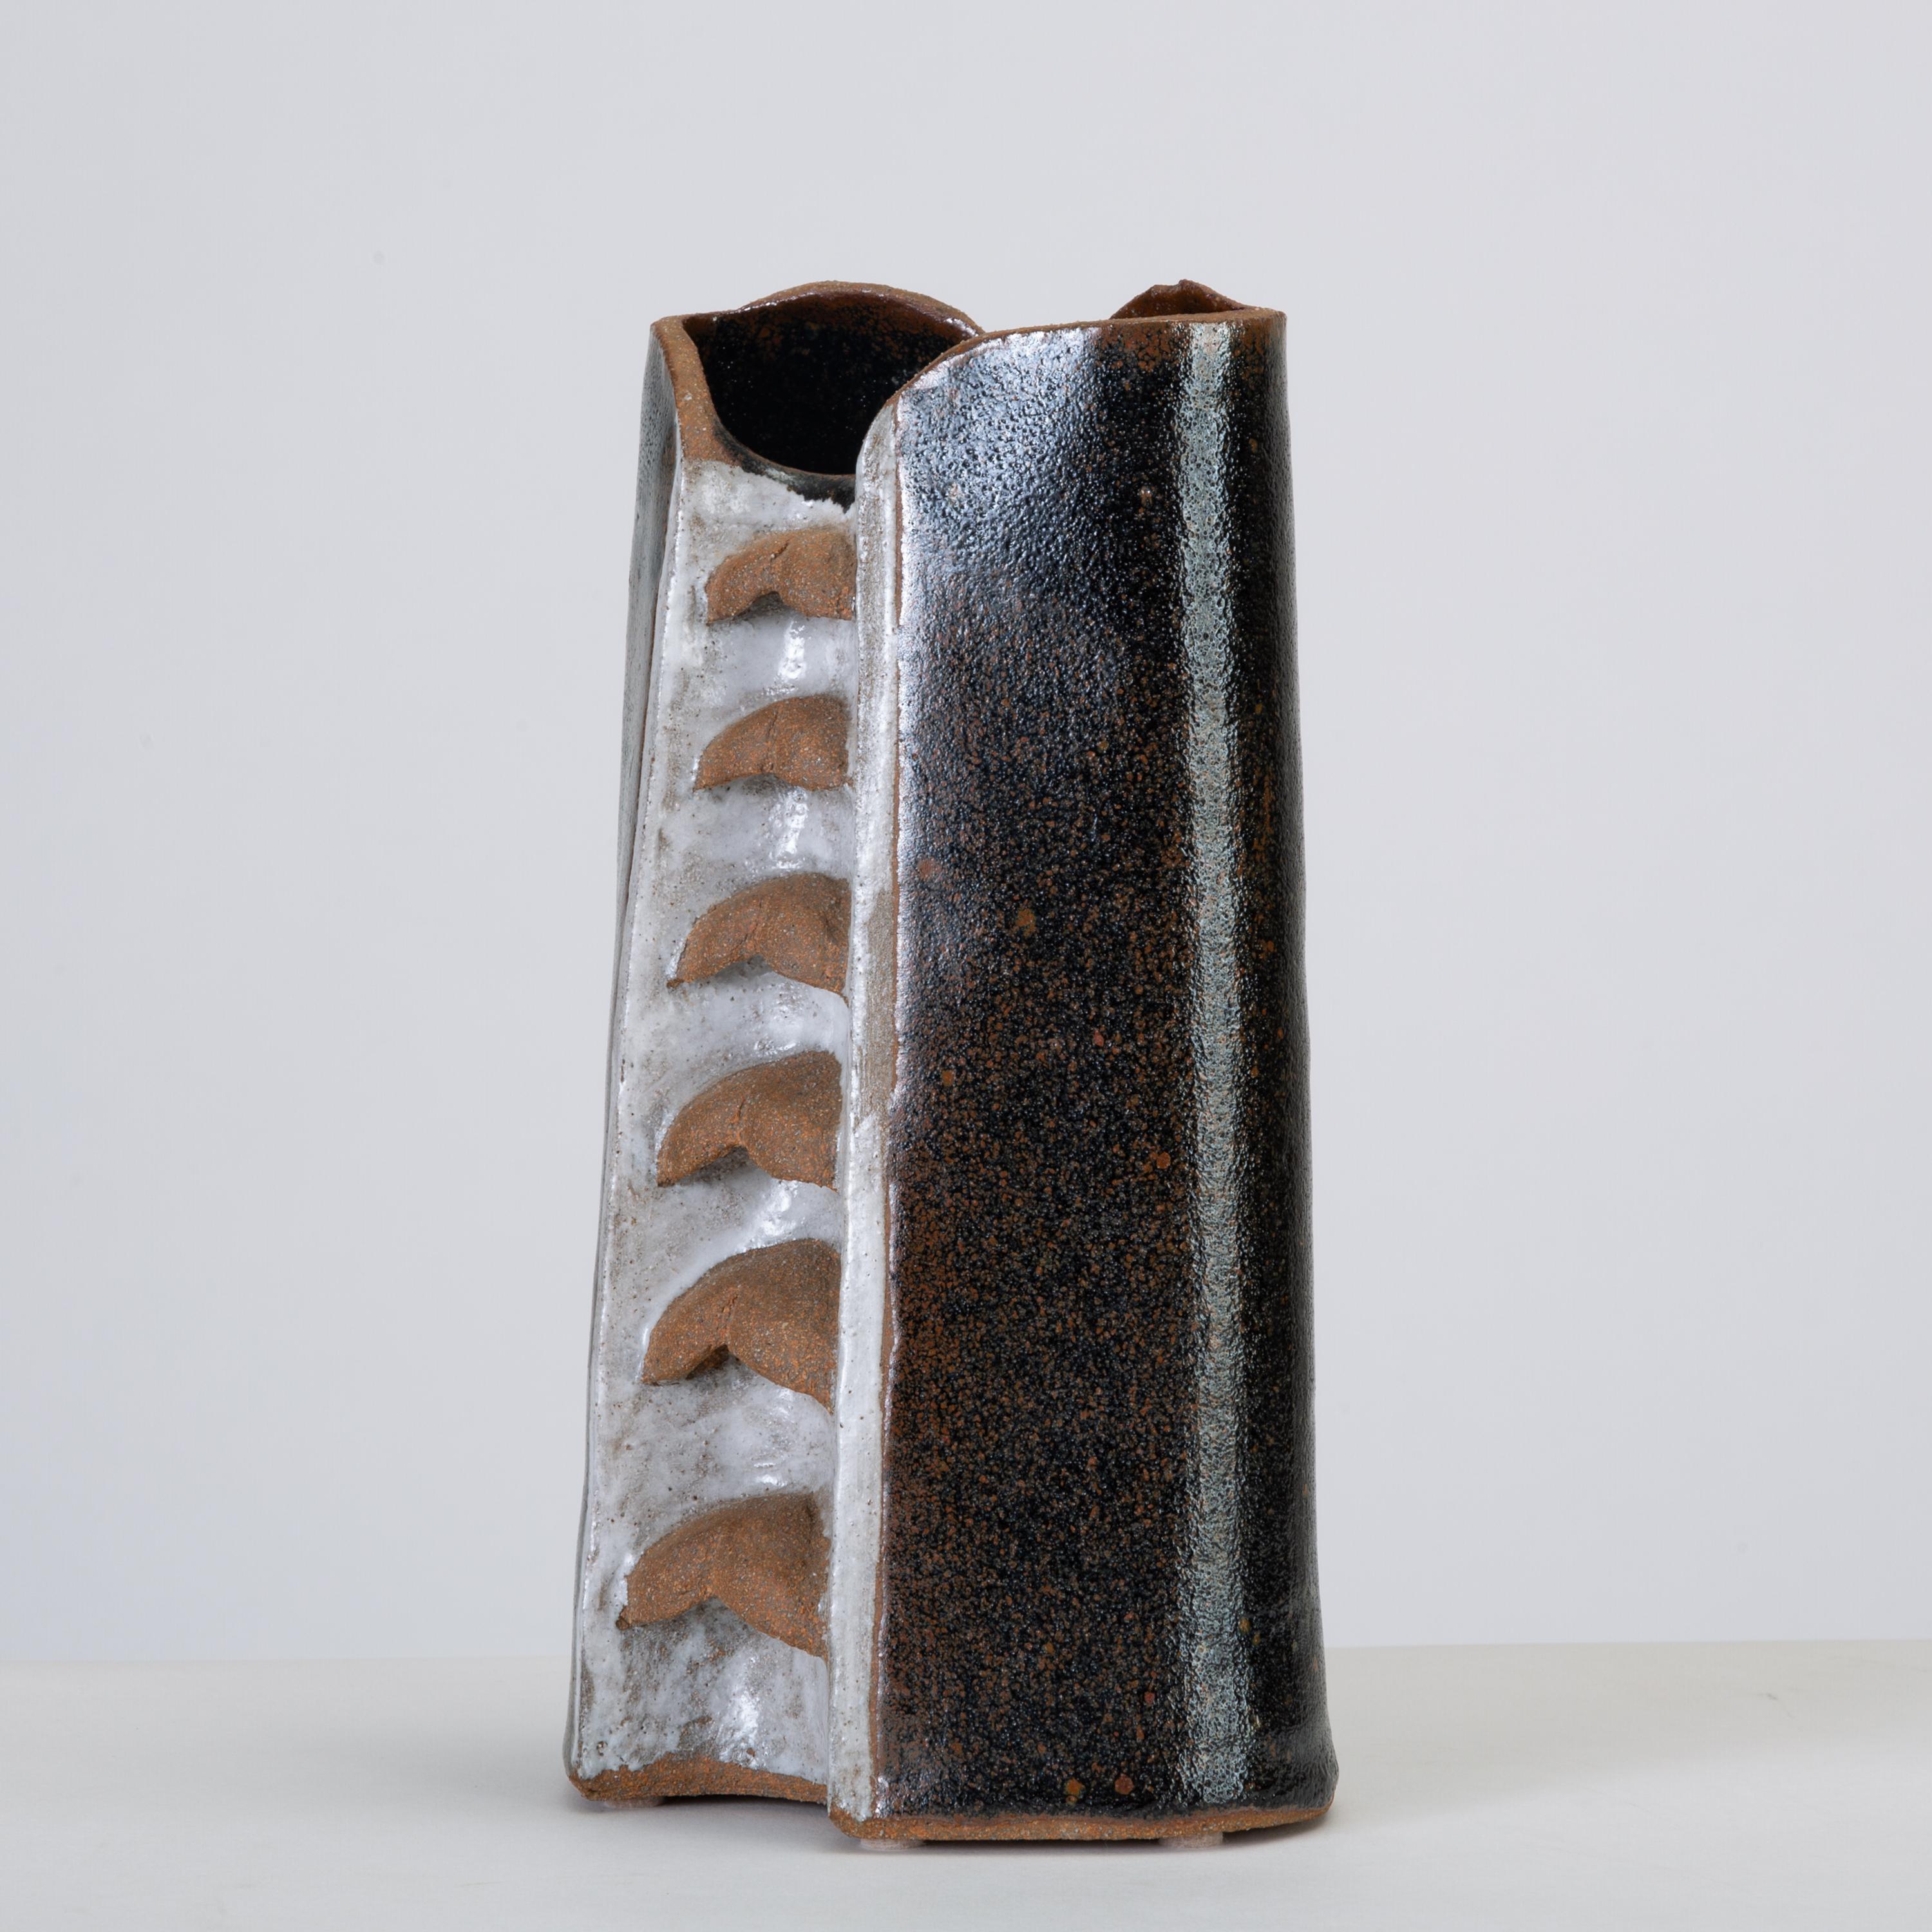 A sharply modern handmade vase from the 1990s. The angular, geometric vessel has a glossy black finish with a contrasting central panel in bright white with a row of unglazed ridges in natural stoneware. Signed by artist 